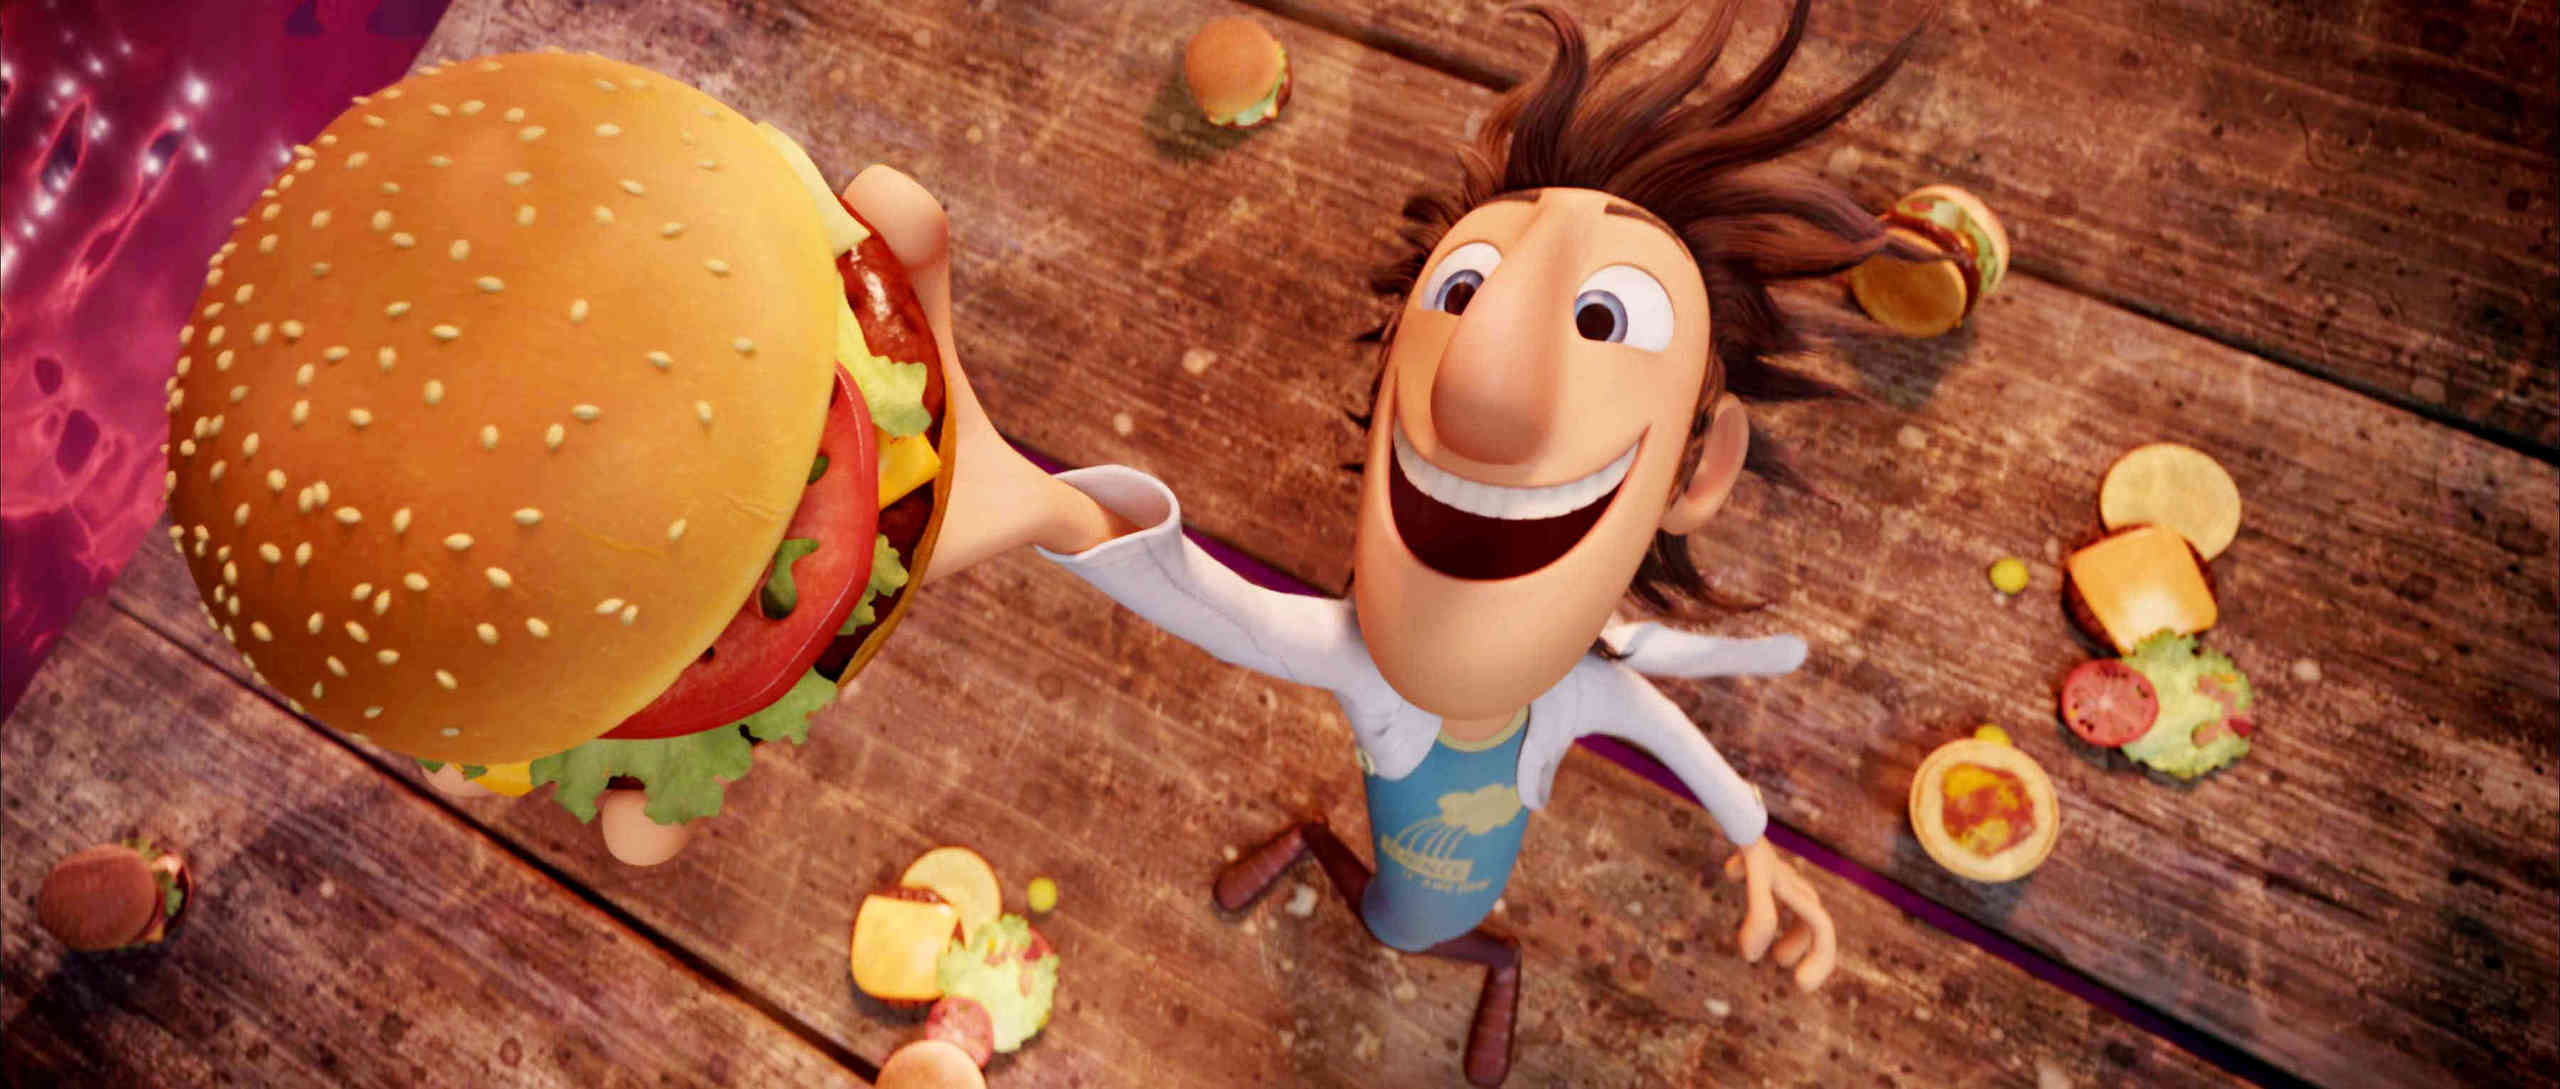 Cloudy with a Chance of Meatballs image Cloudy With A Chance